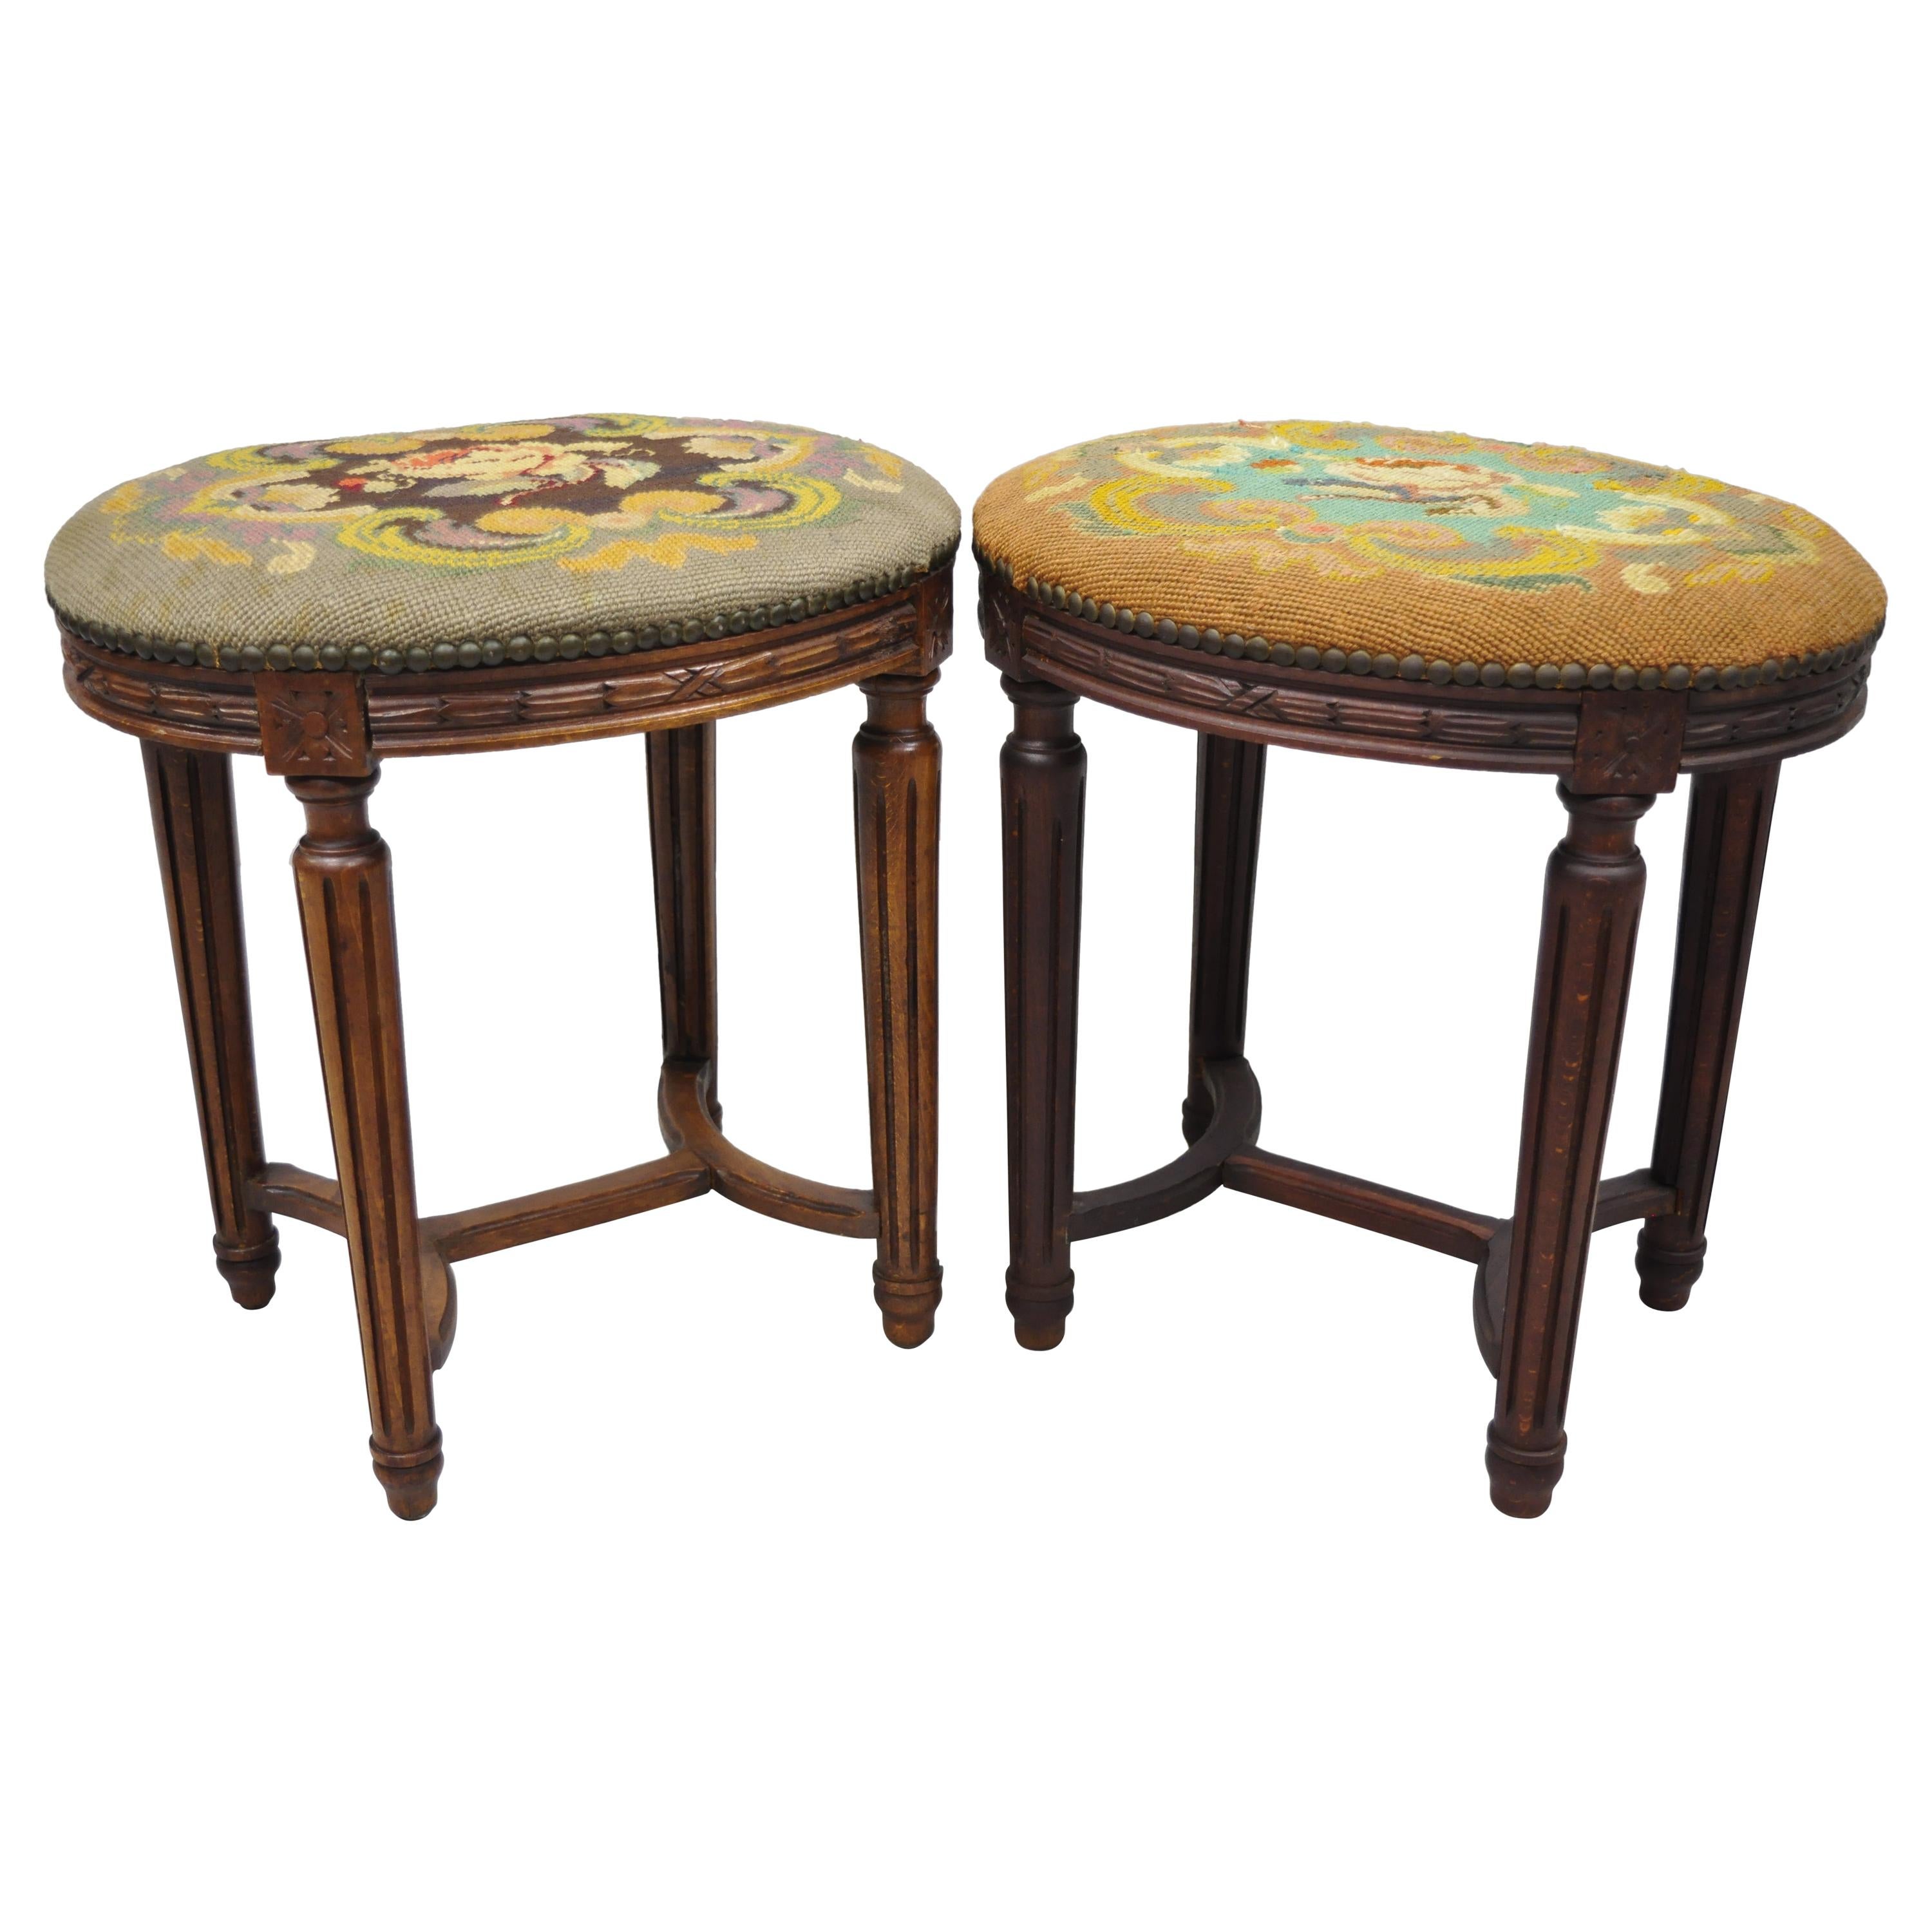 Pair of French Louis XVI Style Carved Walnut and Needlepoint Oval Stools For Sale